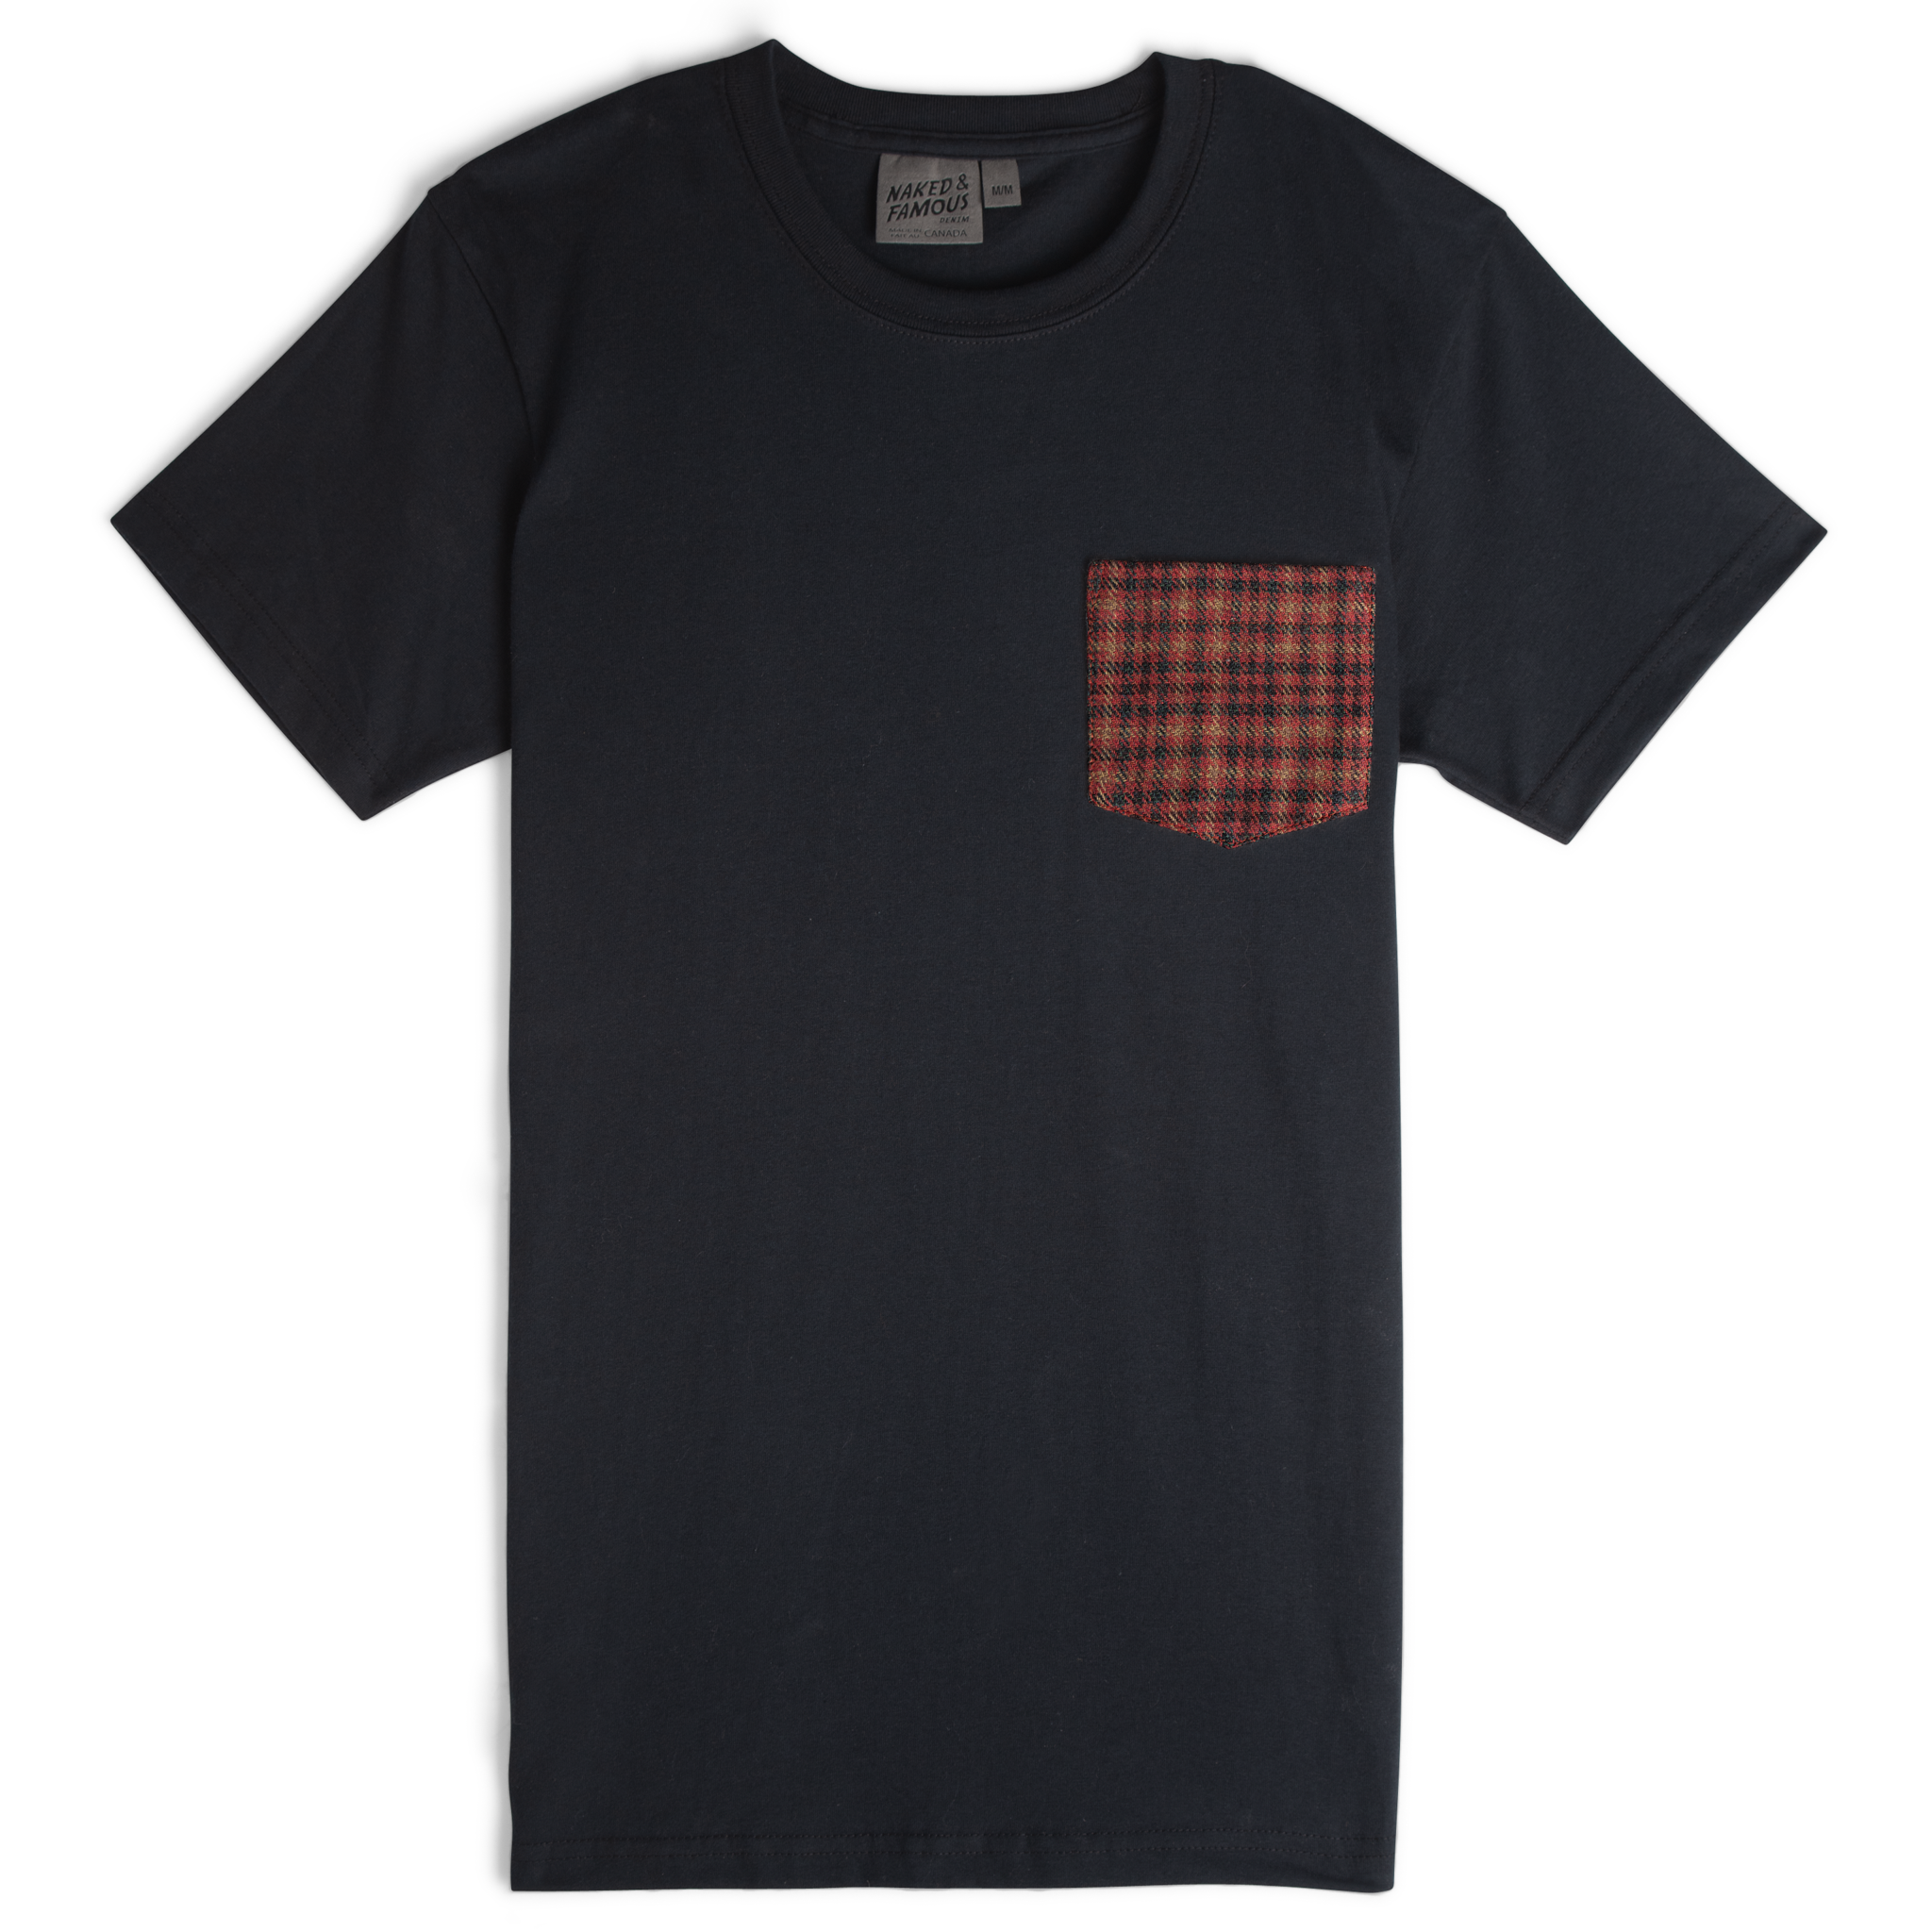  Contract Pocket Tee - Black + Heavy Vintage Flannel Red - flat front 